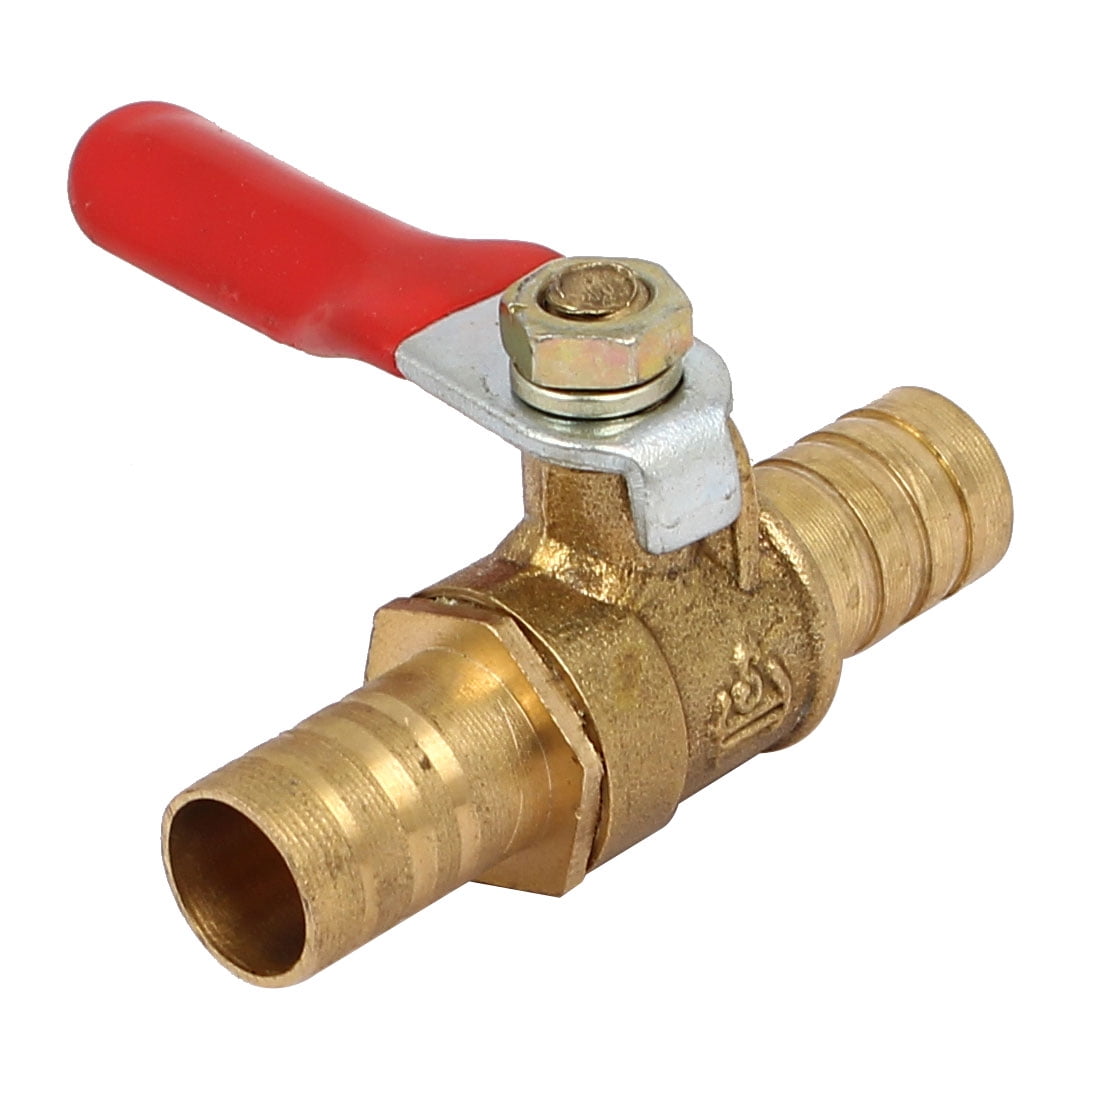 10mm Hose Barb Y Type Three Way Brass Shut Off Ball Valve Pipe Fitting Connector Adapter For Fuel Gas Water Oil Air 